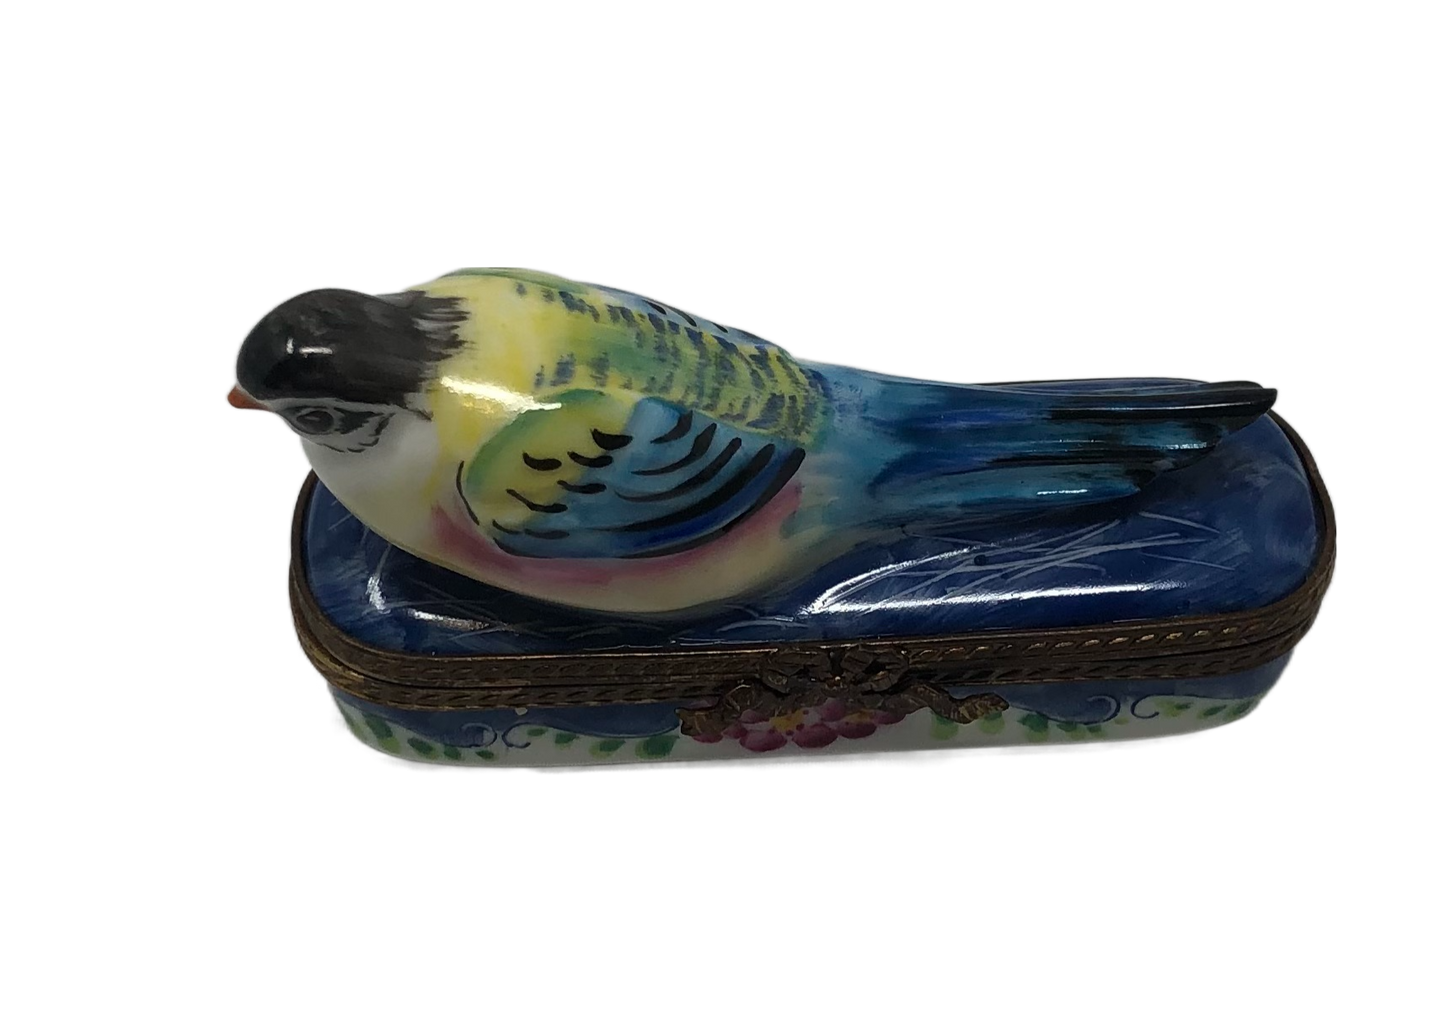 Harmony in Flight: Handcrafted Limoges Box with Vibrant Blue Bird